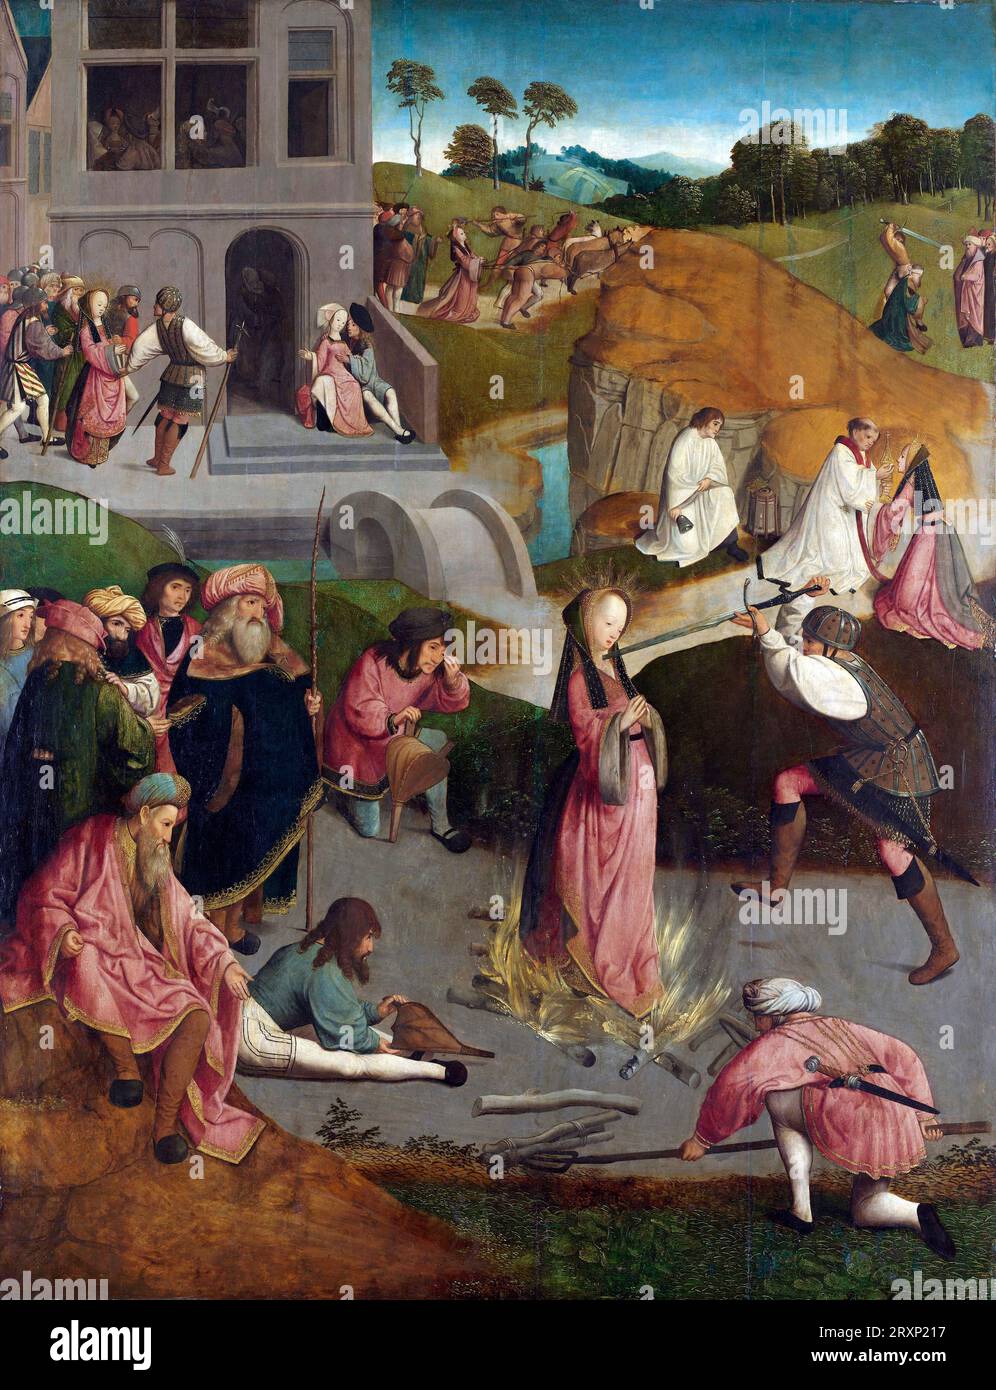 The Martyrdom of Saint Lucy, Master of the Figdor Deposition, c. 1505 - c. 1510 After breaking off her engagement to a Roman consul to become a Christian, Lucy endured many tortures, yet she remained steadfast. She was eventually executed by the sword, as seen here. This panel was part of an altar dedicated to the saint. Stock Photo